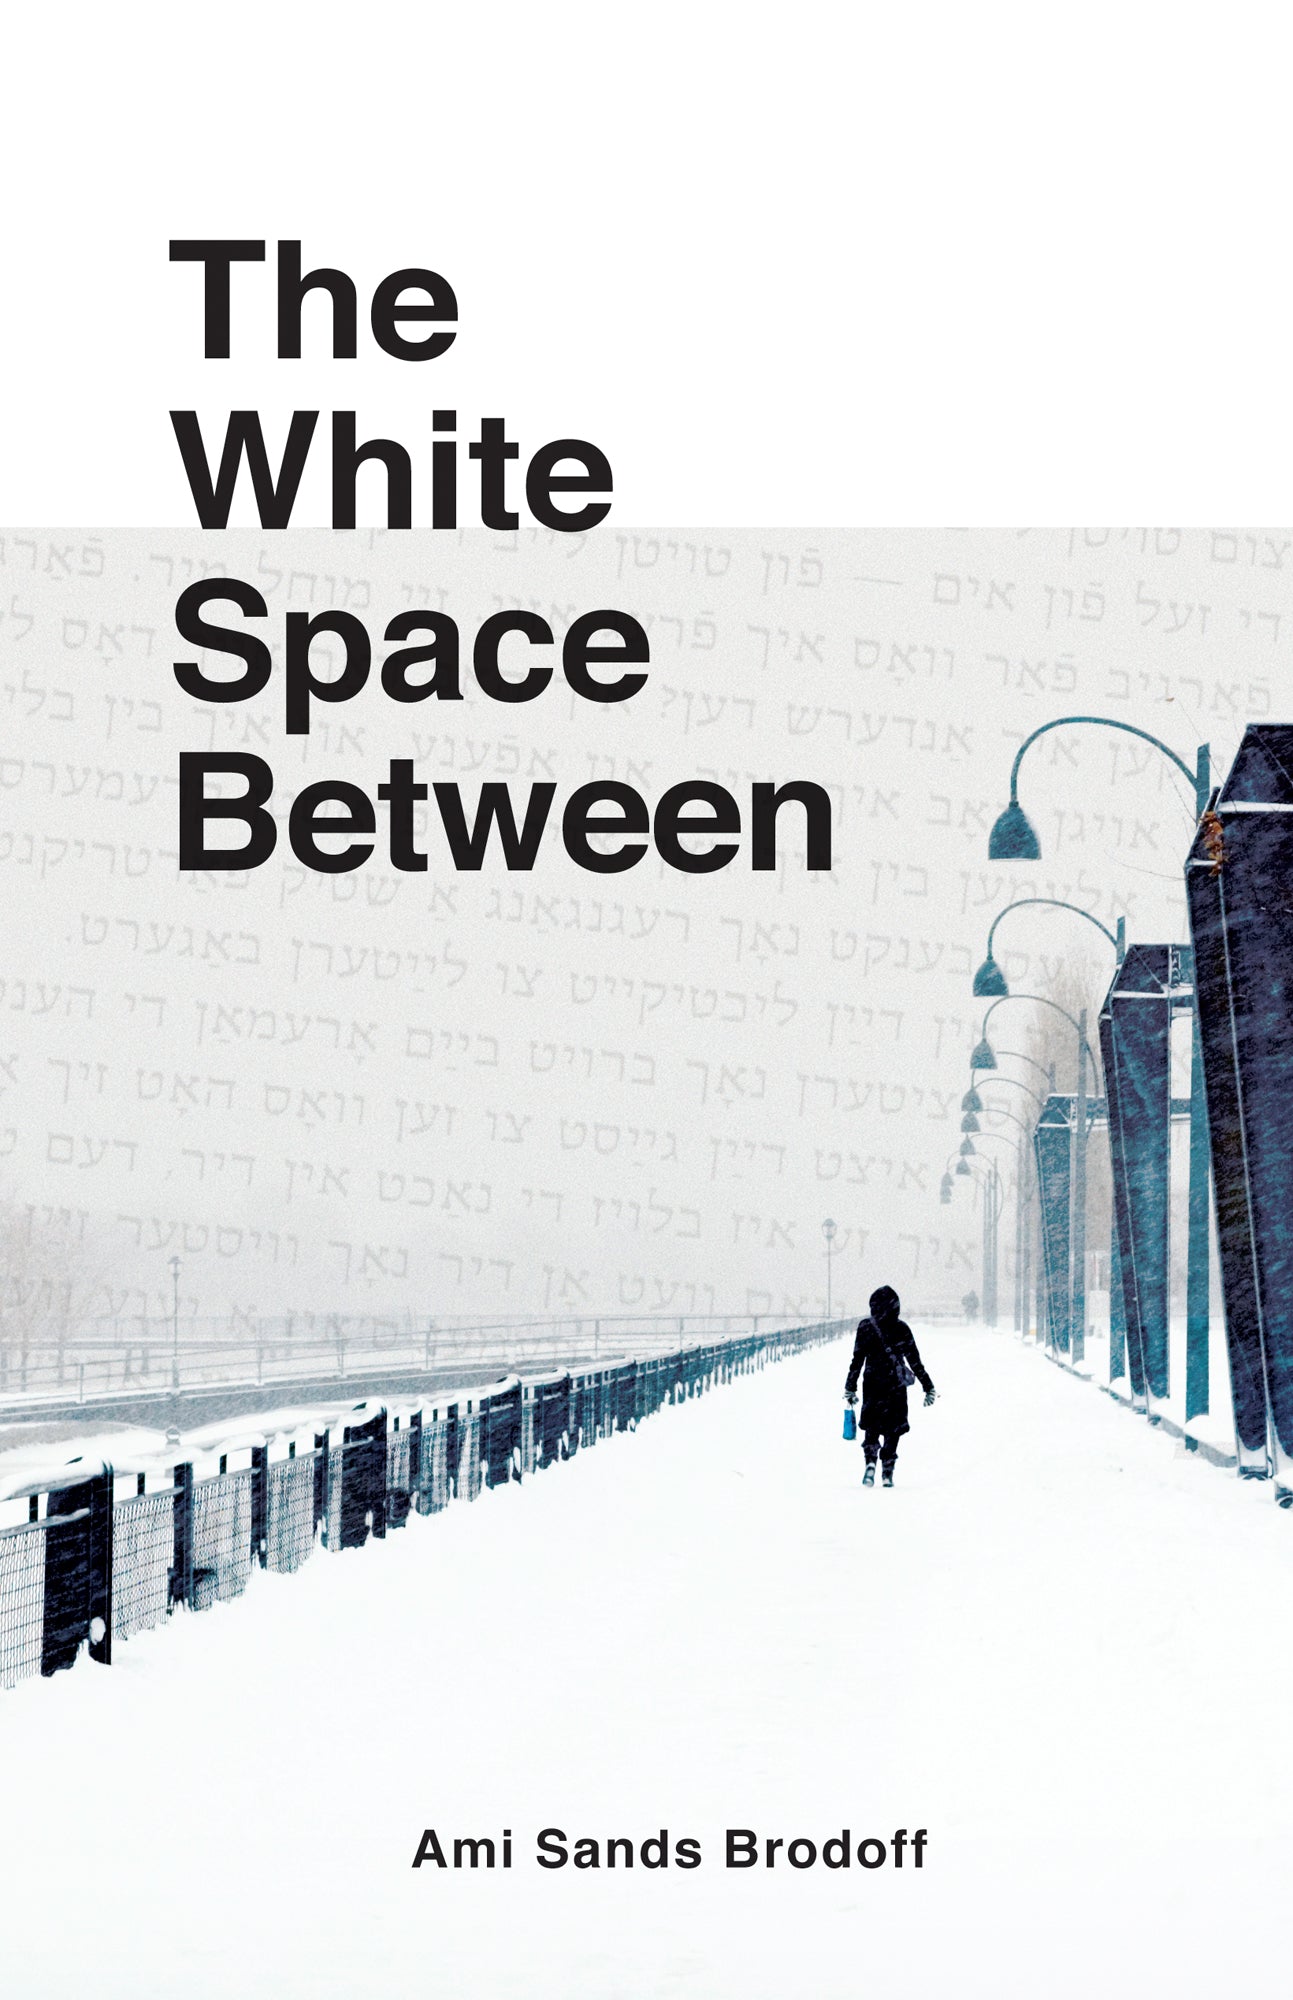 The White Space Between-ebook